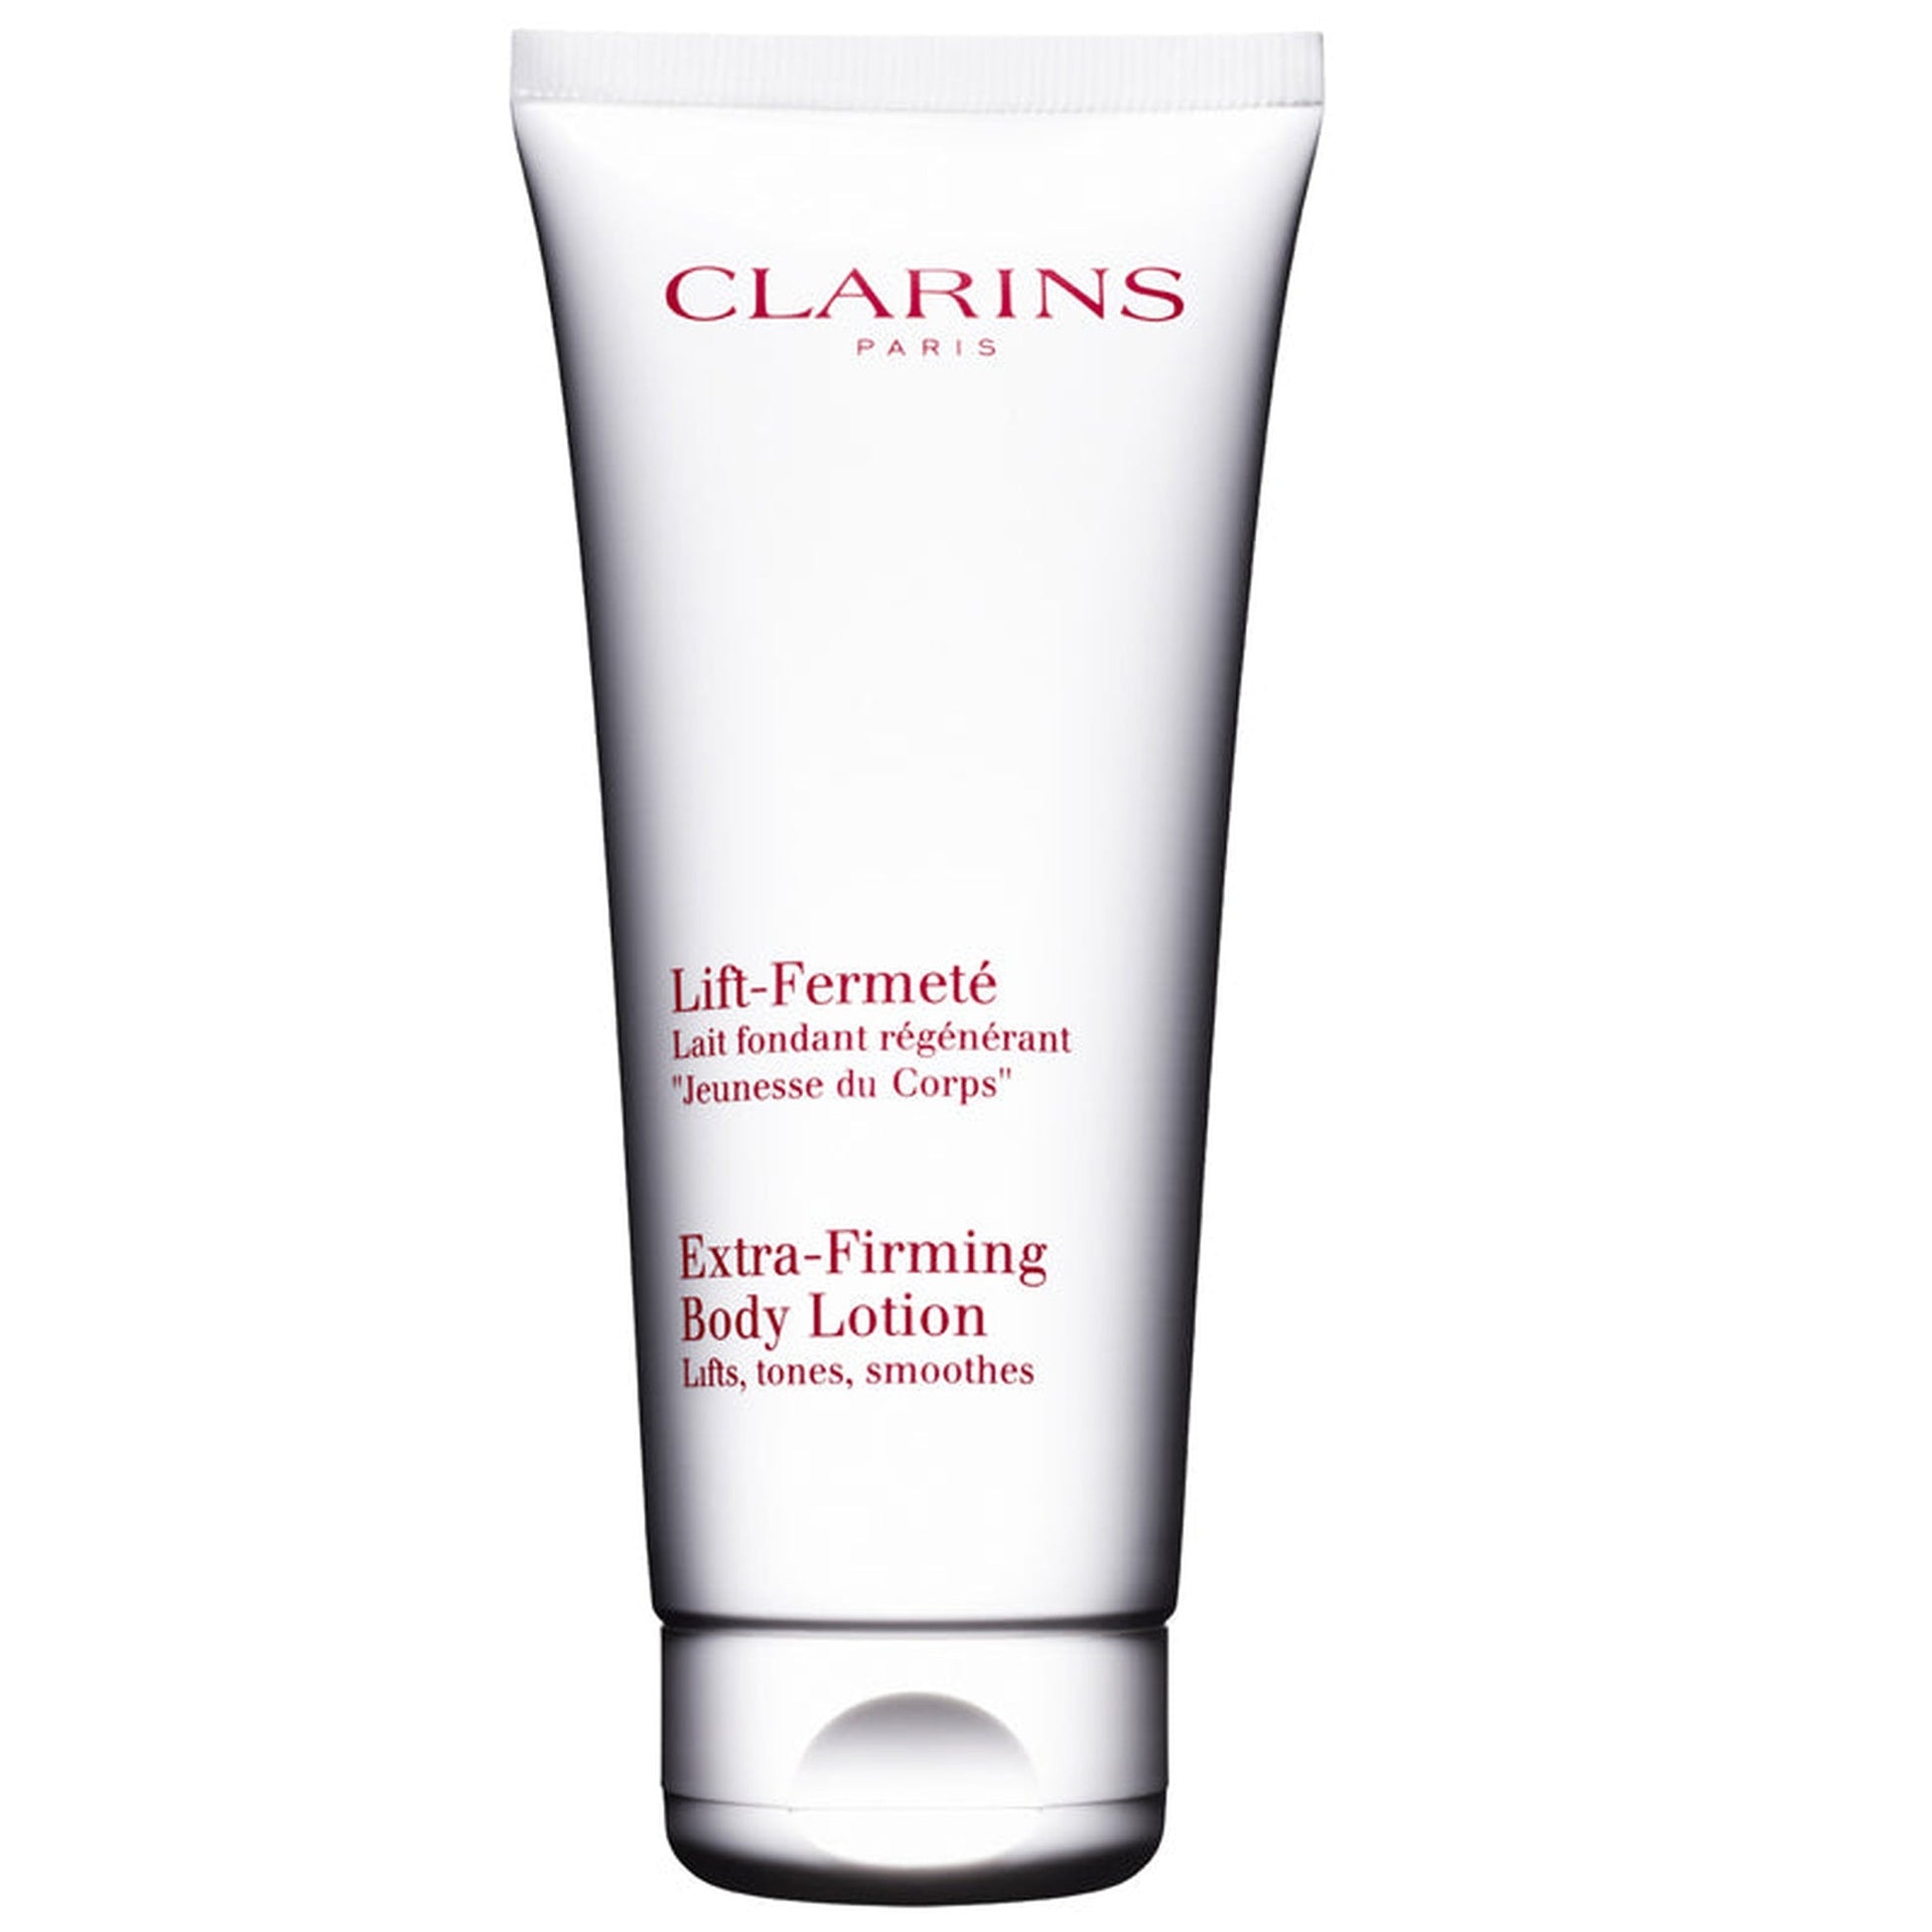 Clarins Extra-Firming Body Lotion 100ml-CLARINS-BeautyNmakeup.co.uk